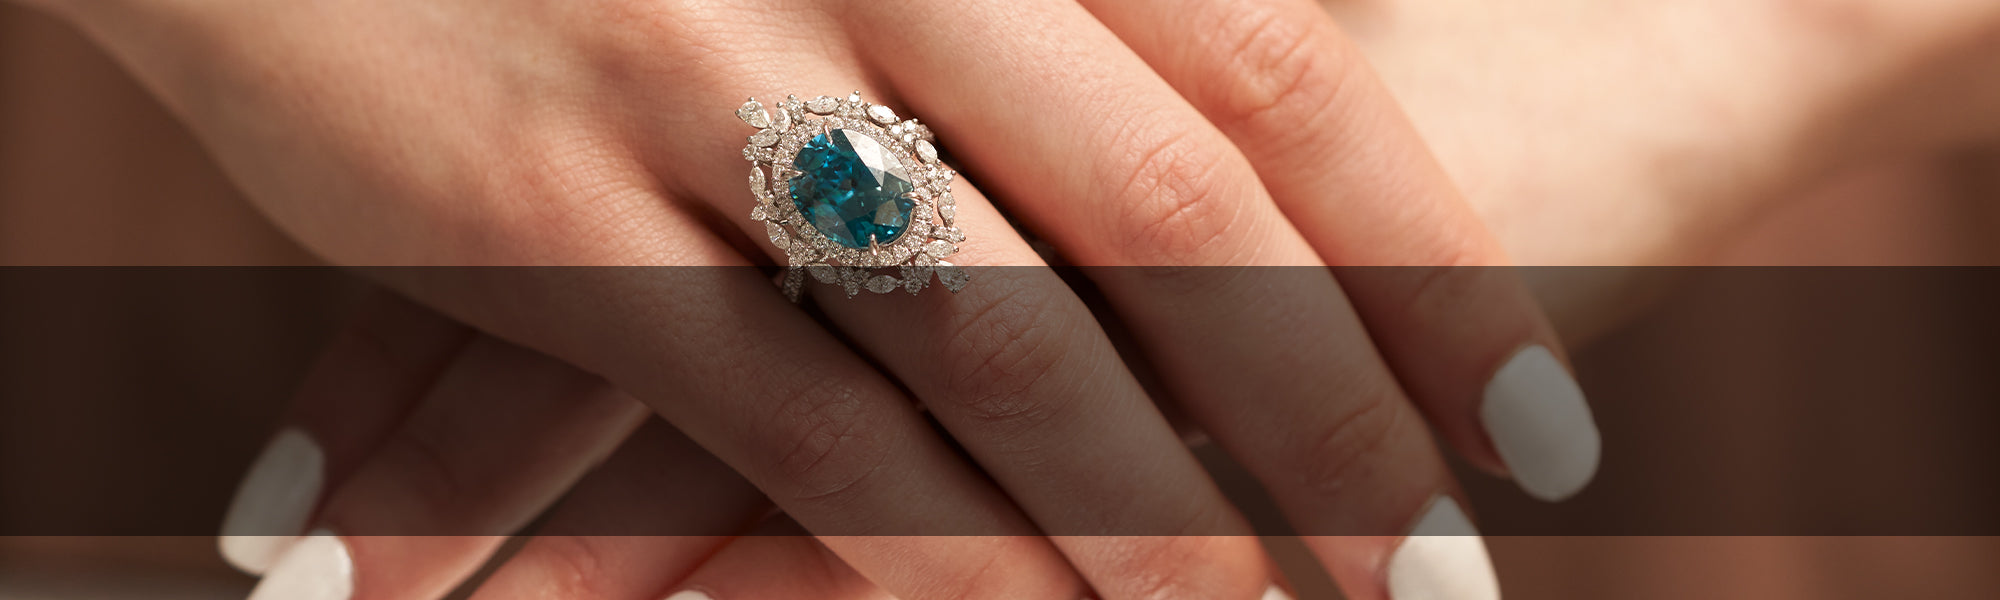 Woman Wearing Blue Zircon Ring by Park City Jewelers